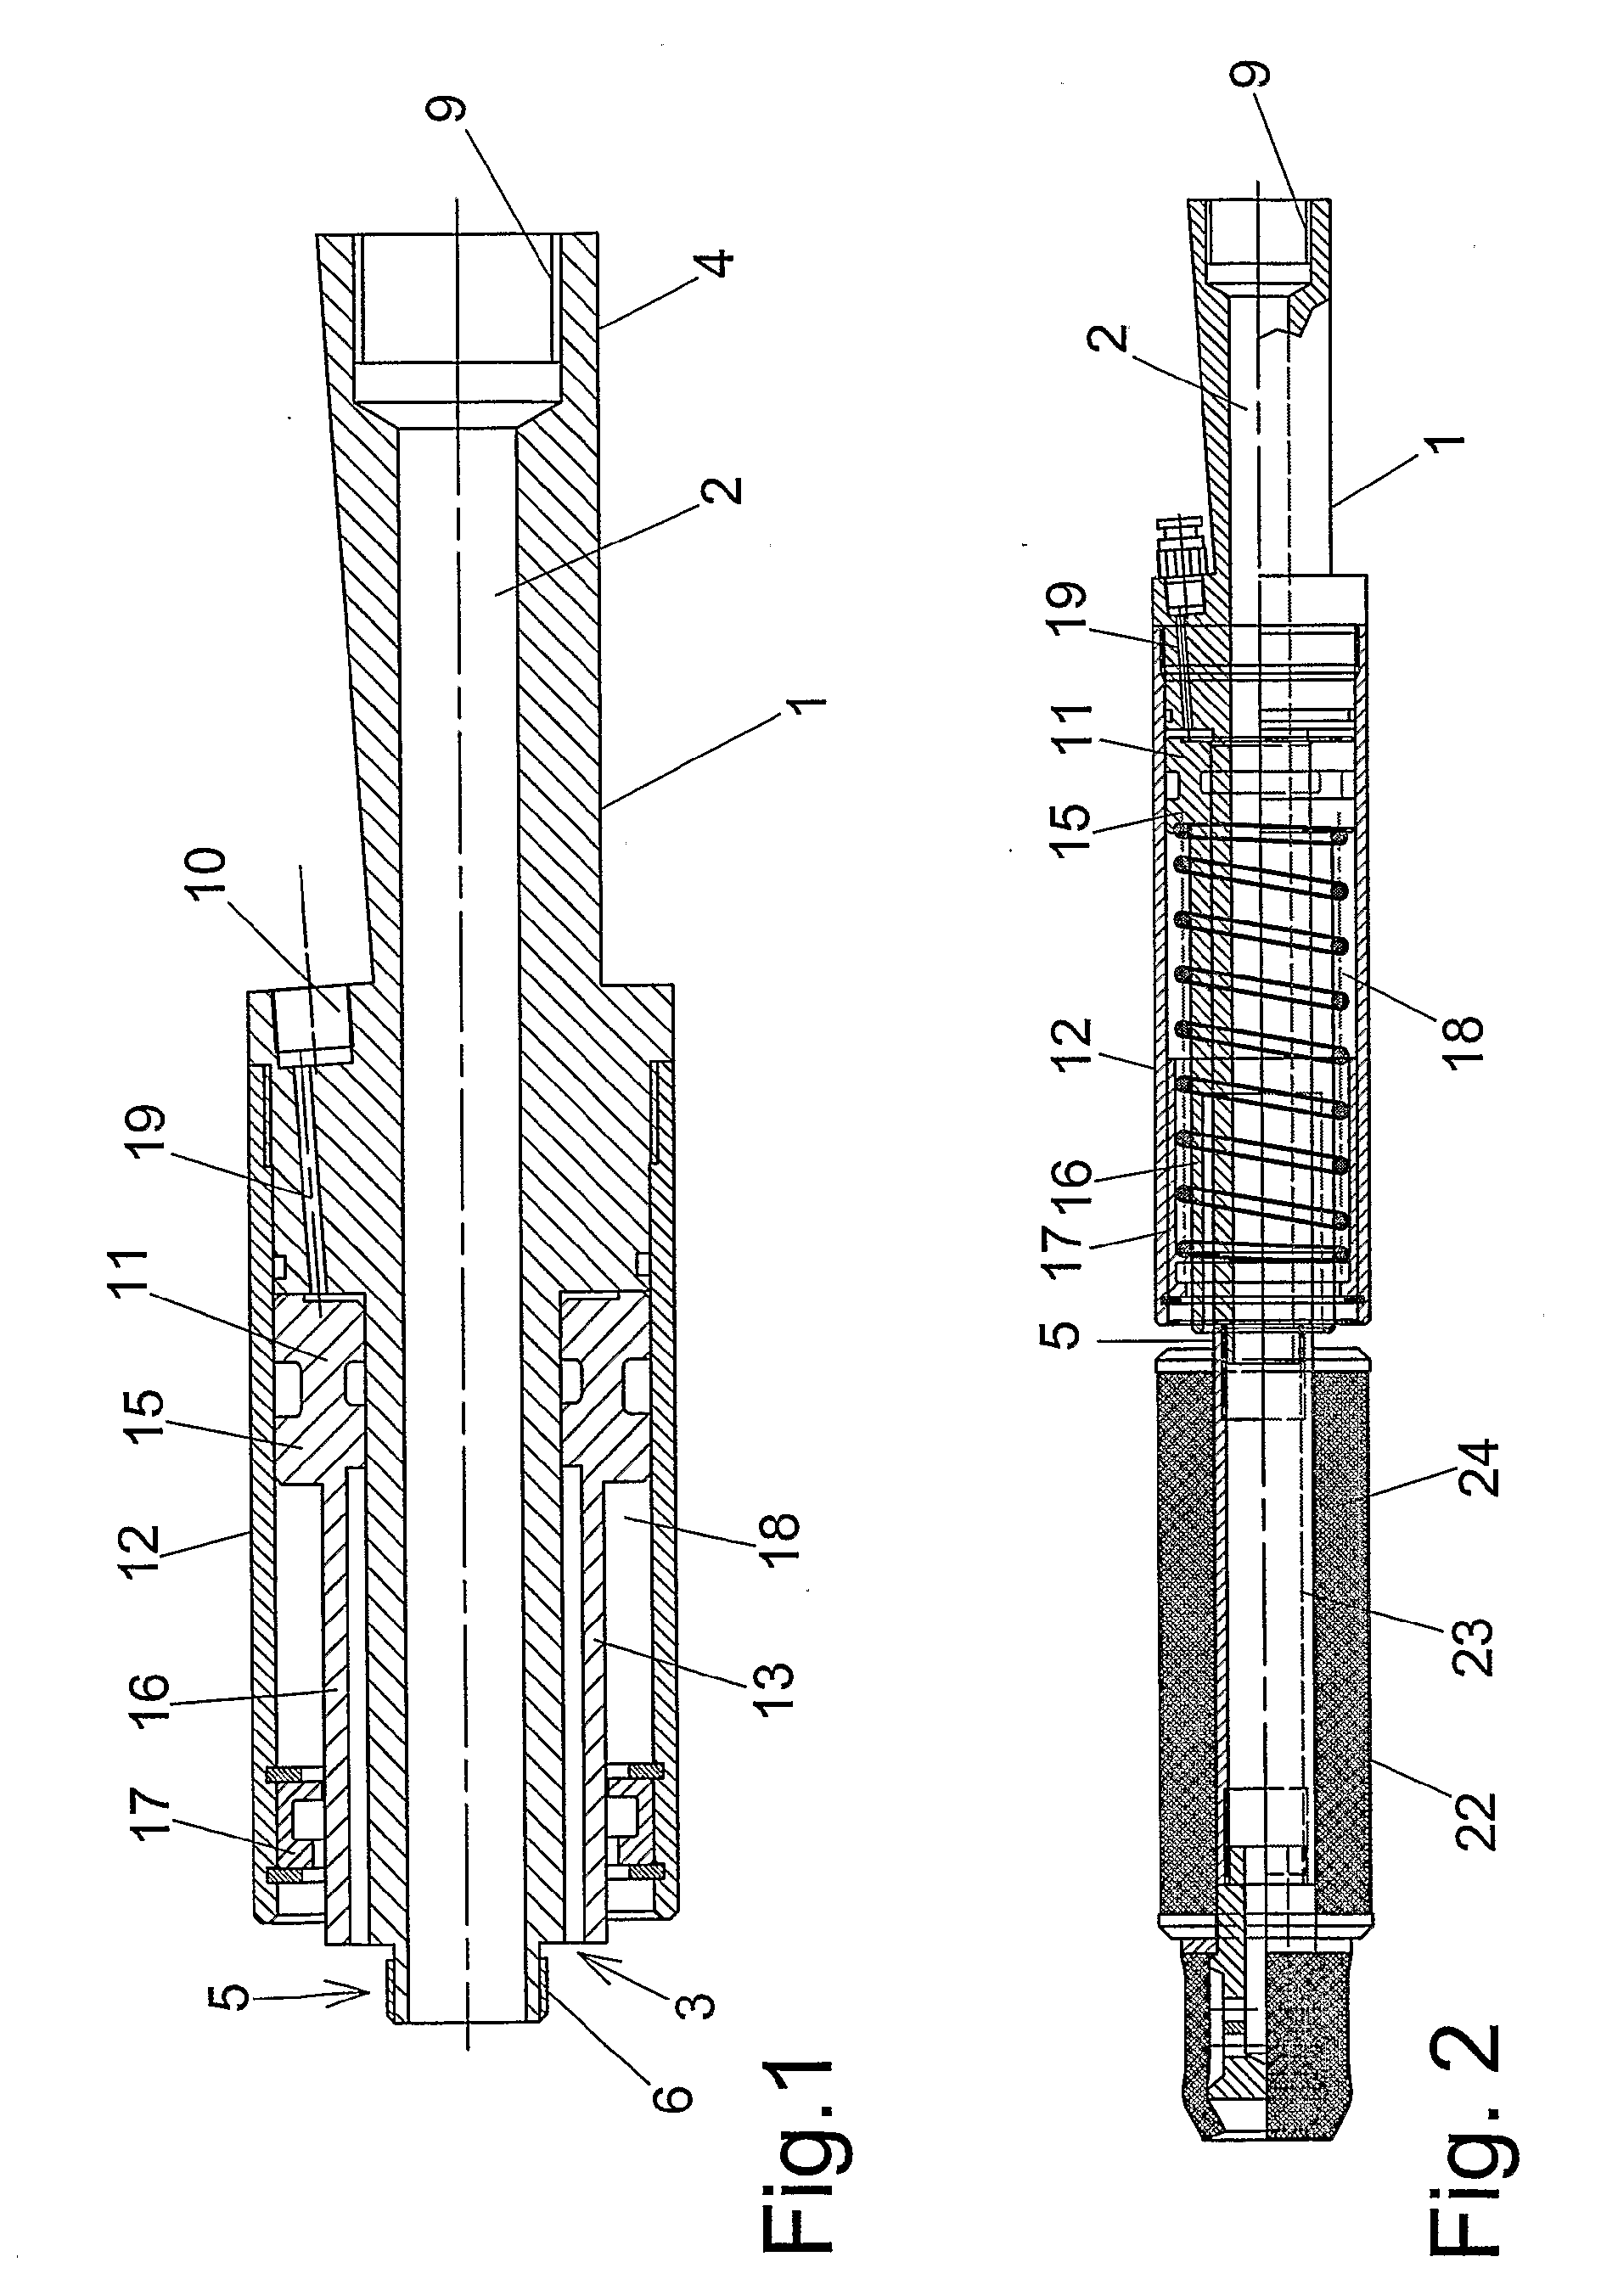 Arrangement for Affixing an Expandable Packer in a Hole